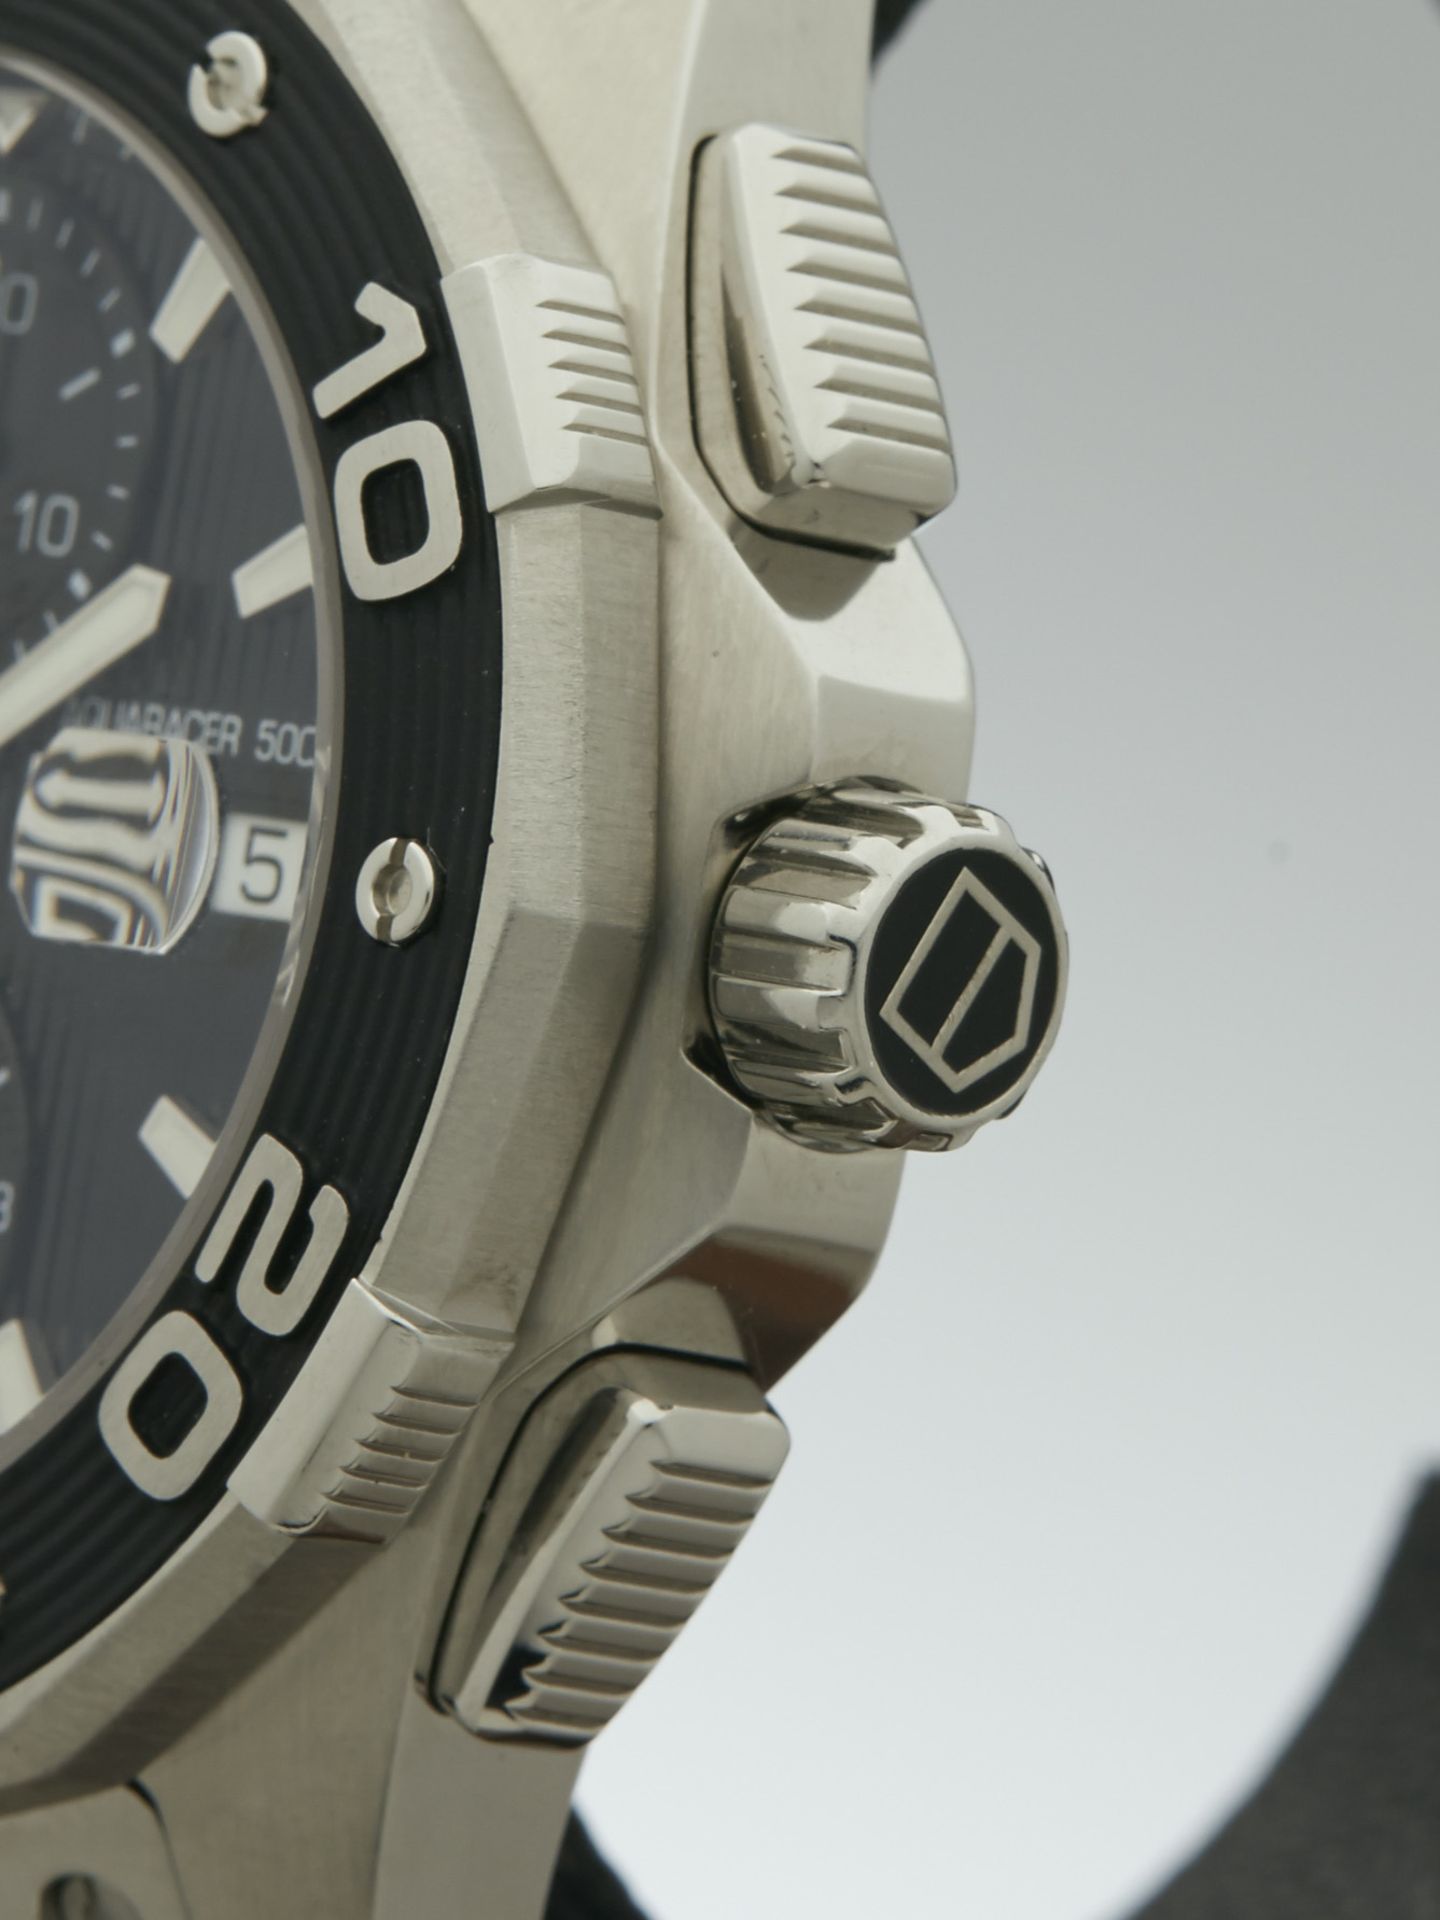 Tag heuer, Aquaracer 44mm Stainless Steel - Image 10 of 10